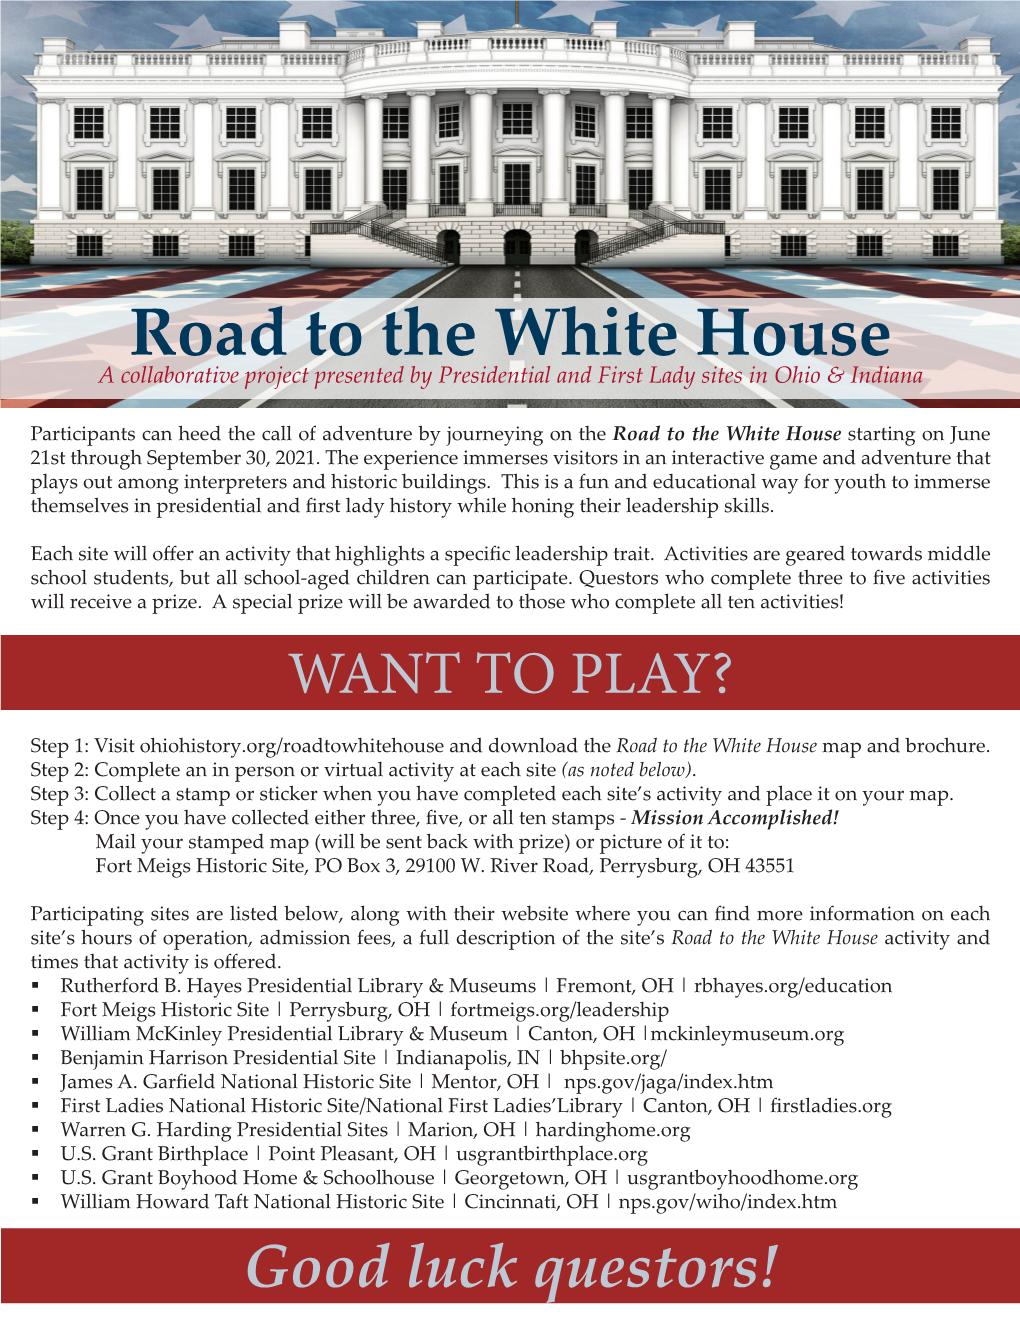 Road to the White House a Collaborative Project Presented by Presidential and First Lady Sites in Ohio & Indiana